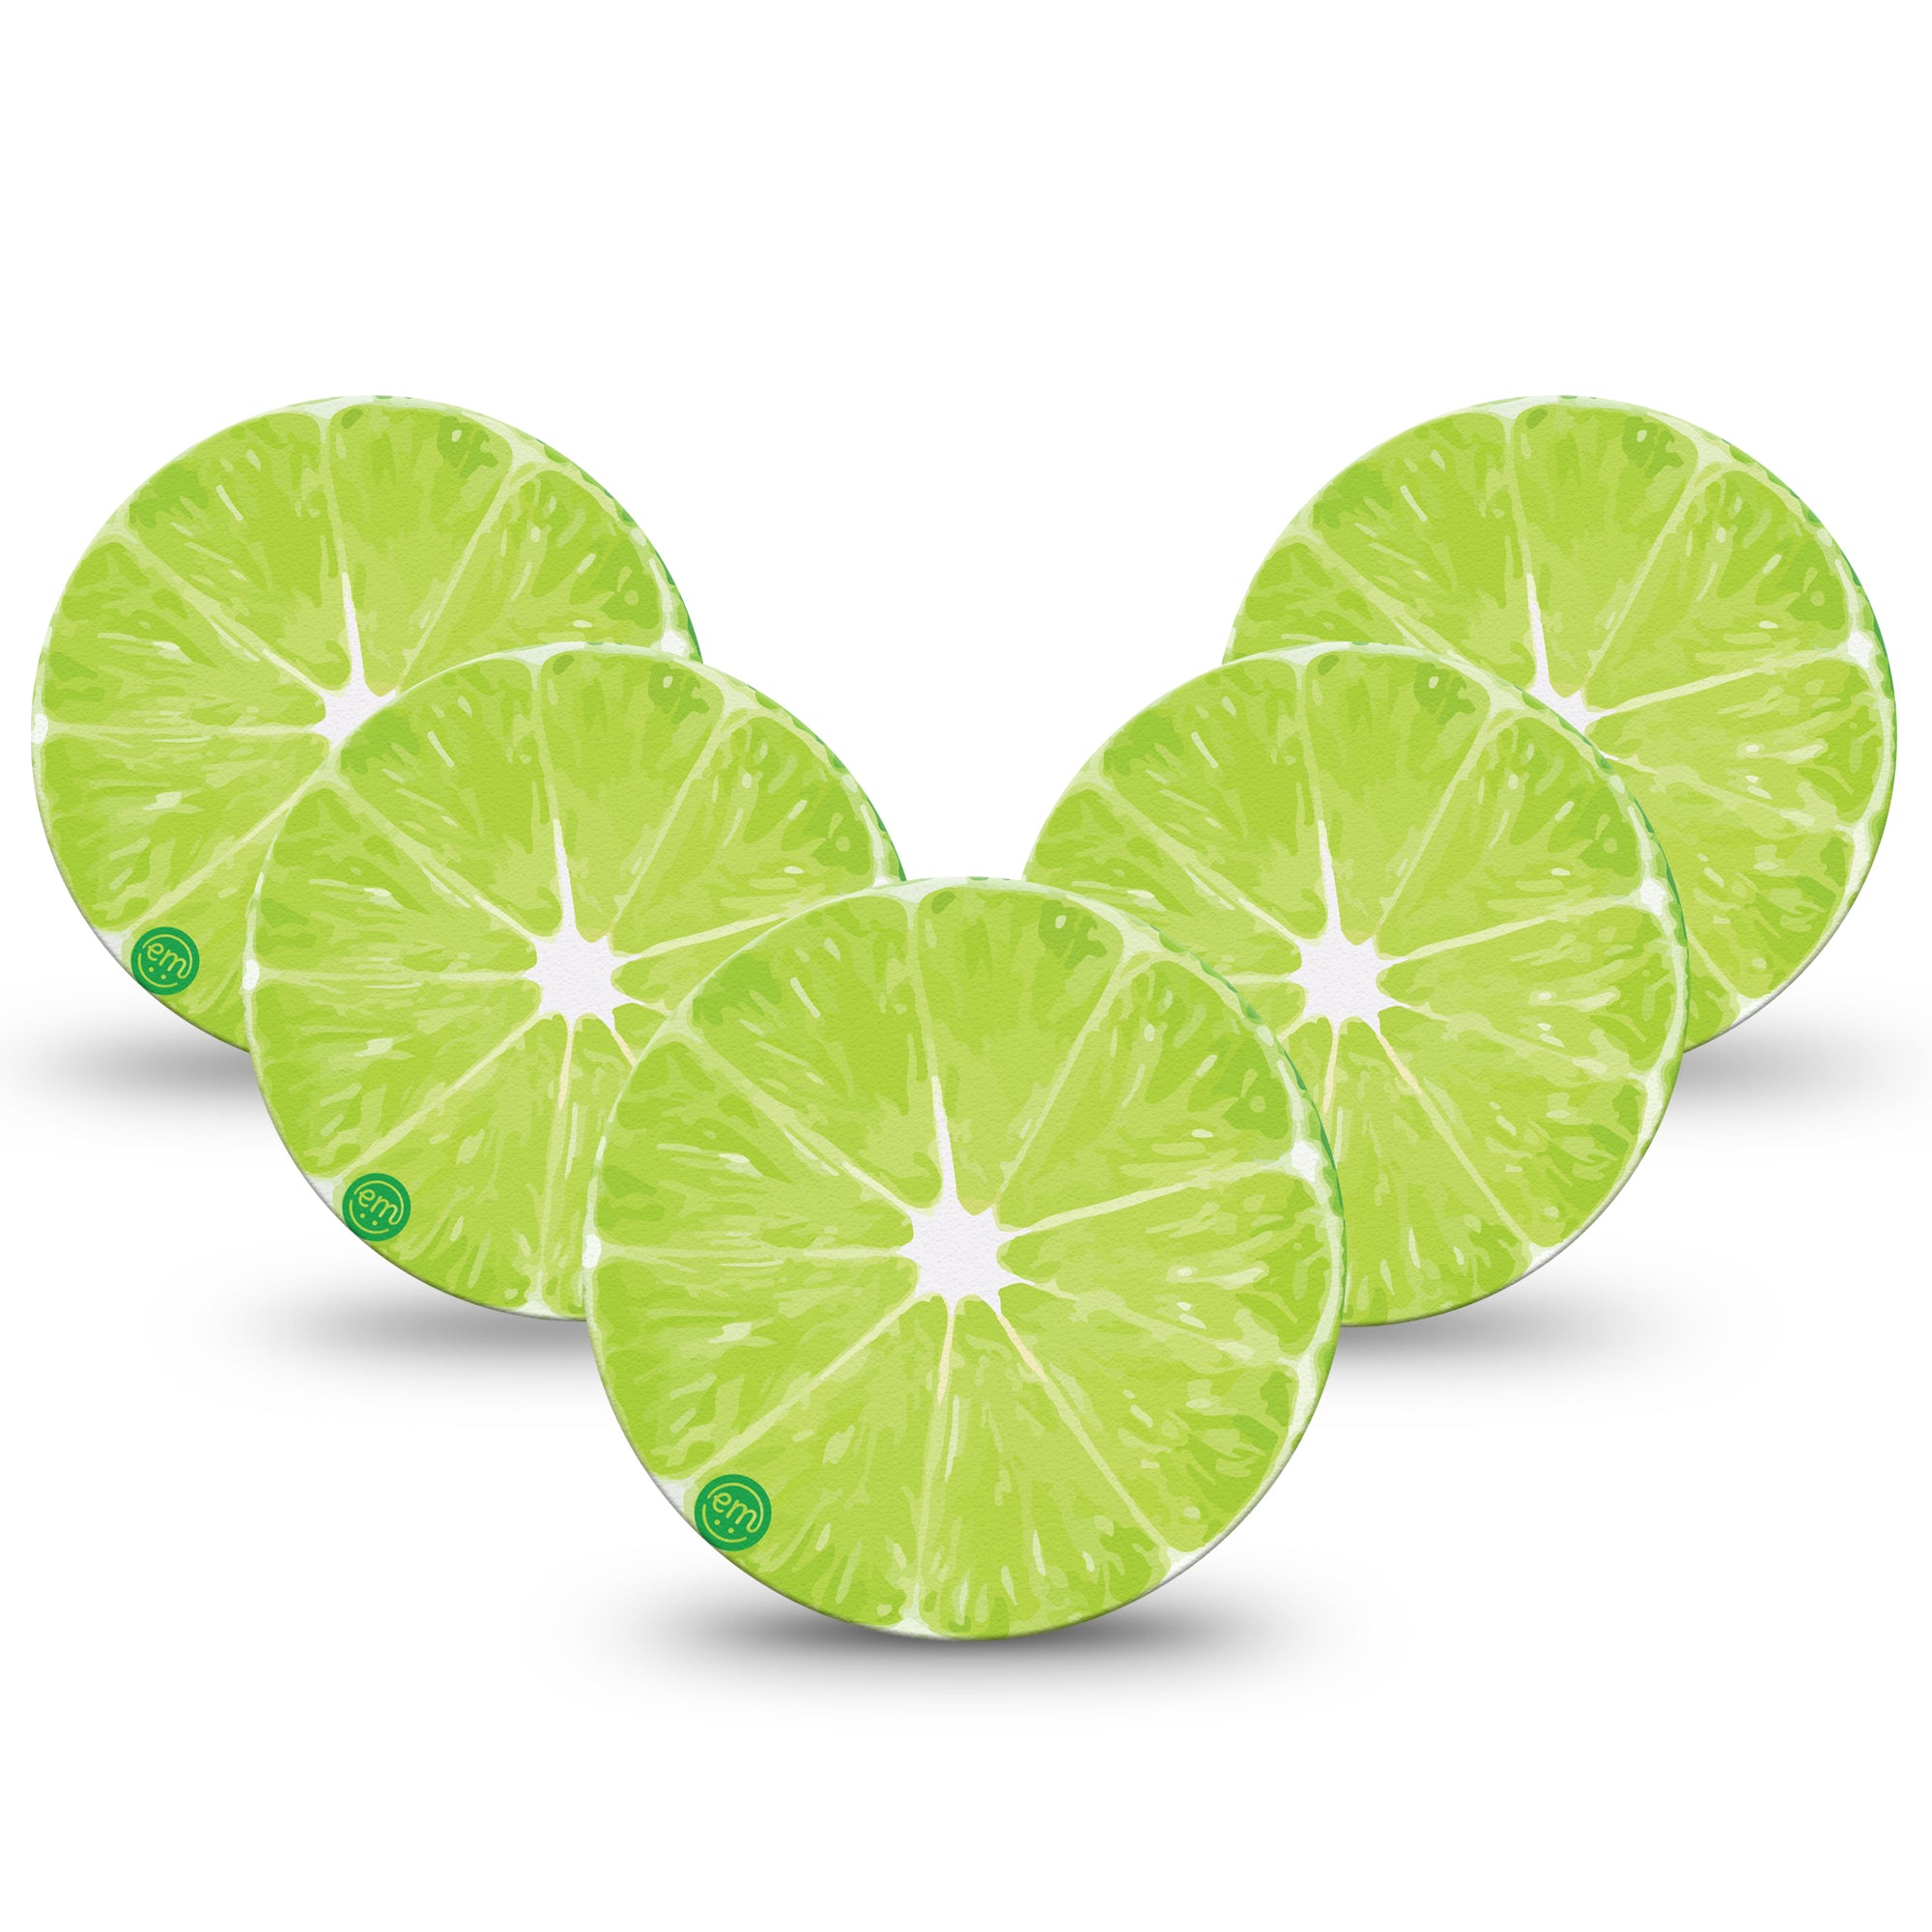 ExpressionMed Lime  Libre 3 Overpatch, 5-Pack, Sliced Lime Inspired, CGM Adhesive Tape Design